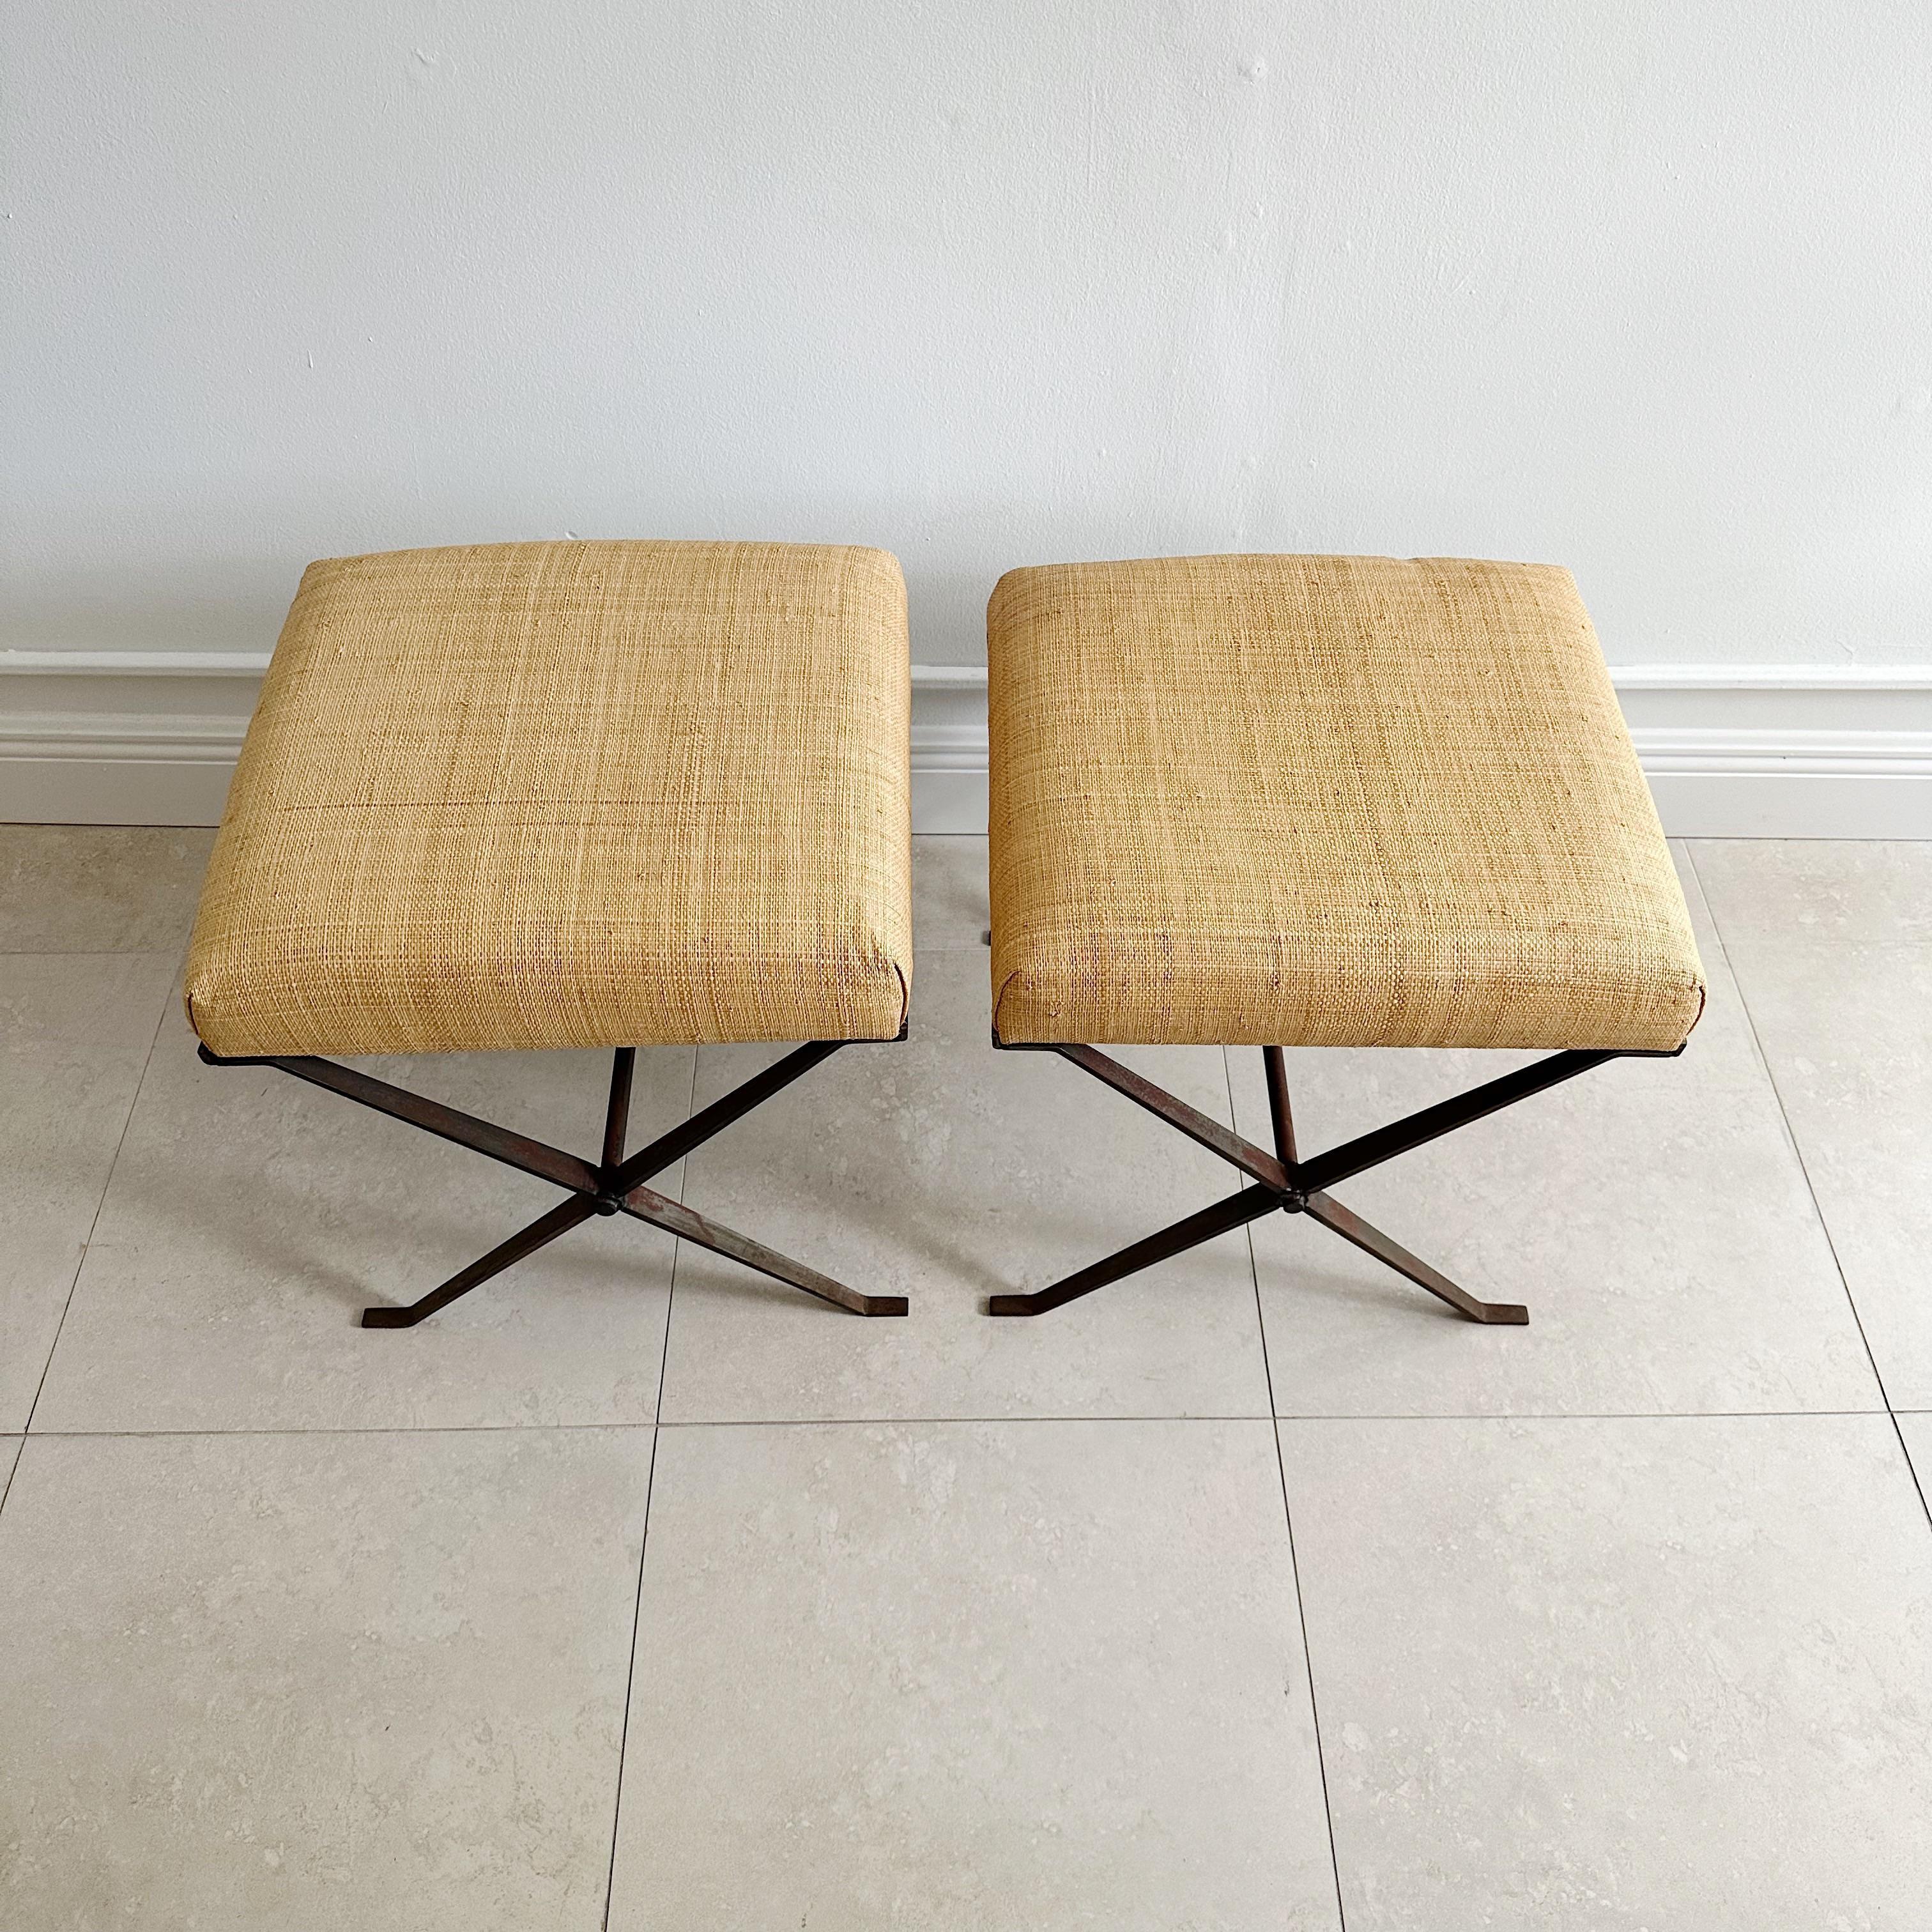 Pair of benches stools upholstered in a rattan fabric, the x bases in distressed steel. Unsigned
